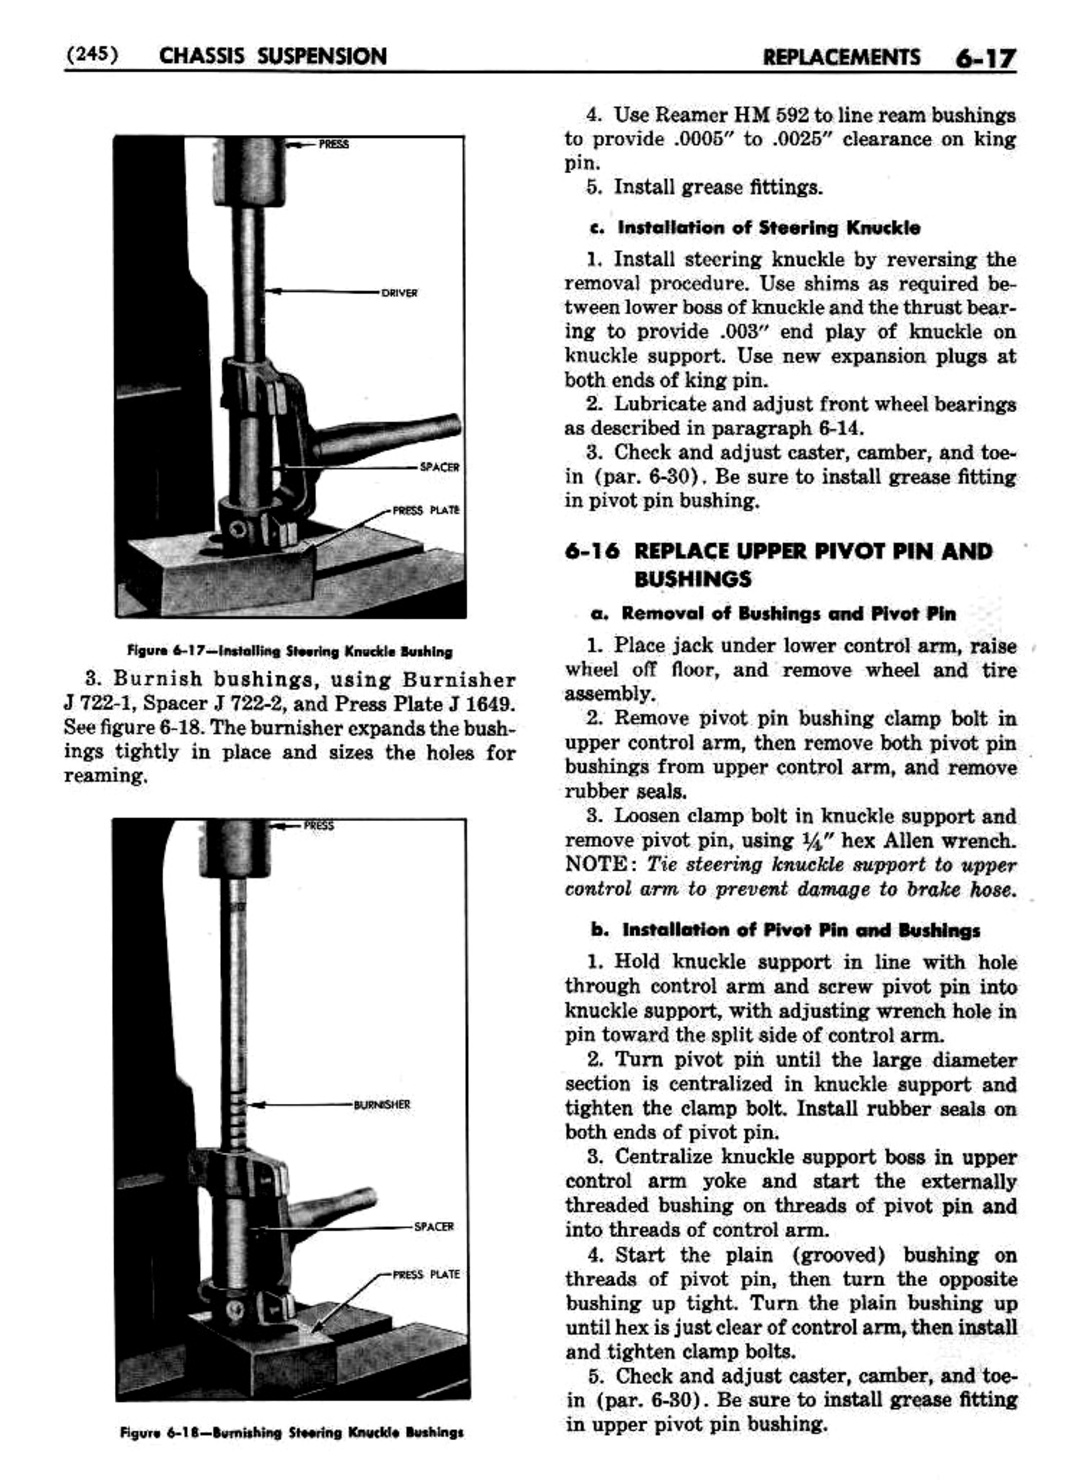 n_07 1951 Buick Shop Manual - Chassis Suspension-017-017.jpg